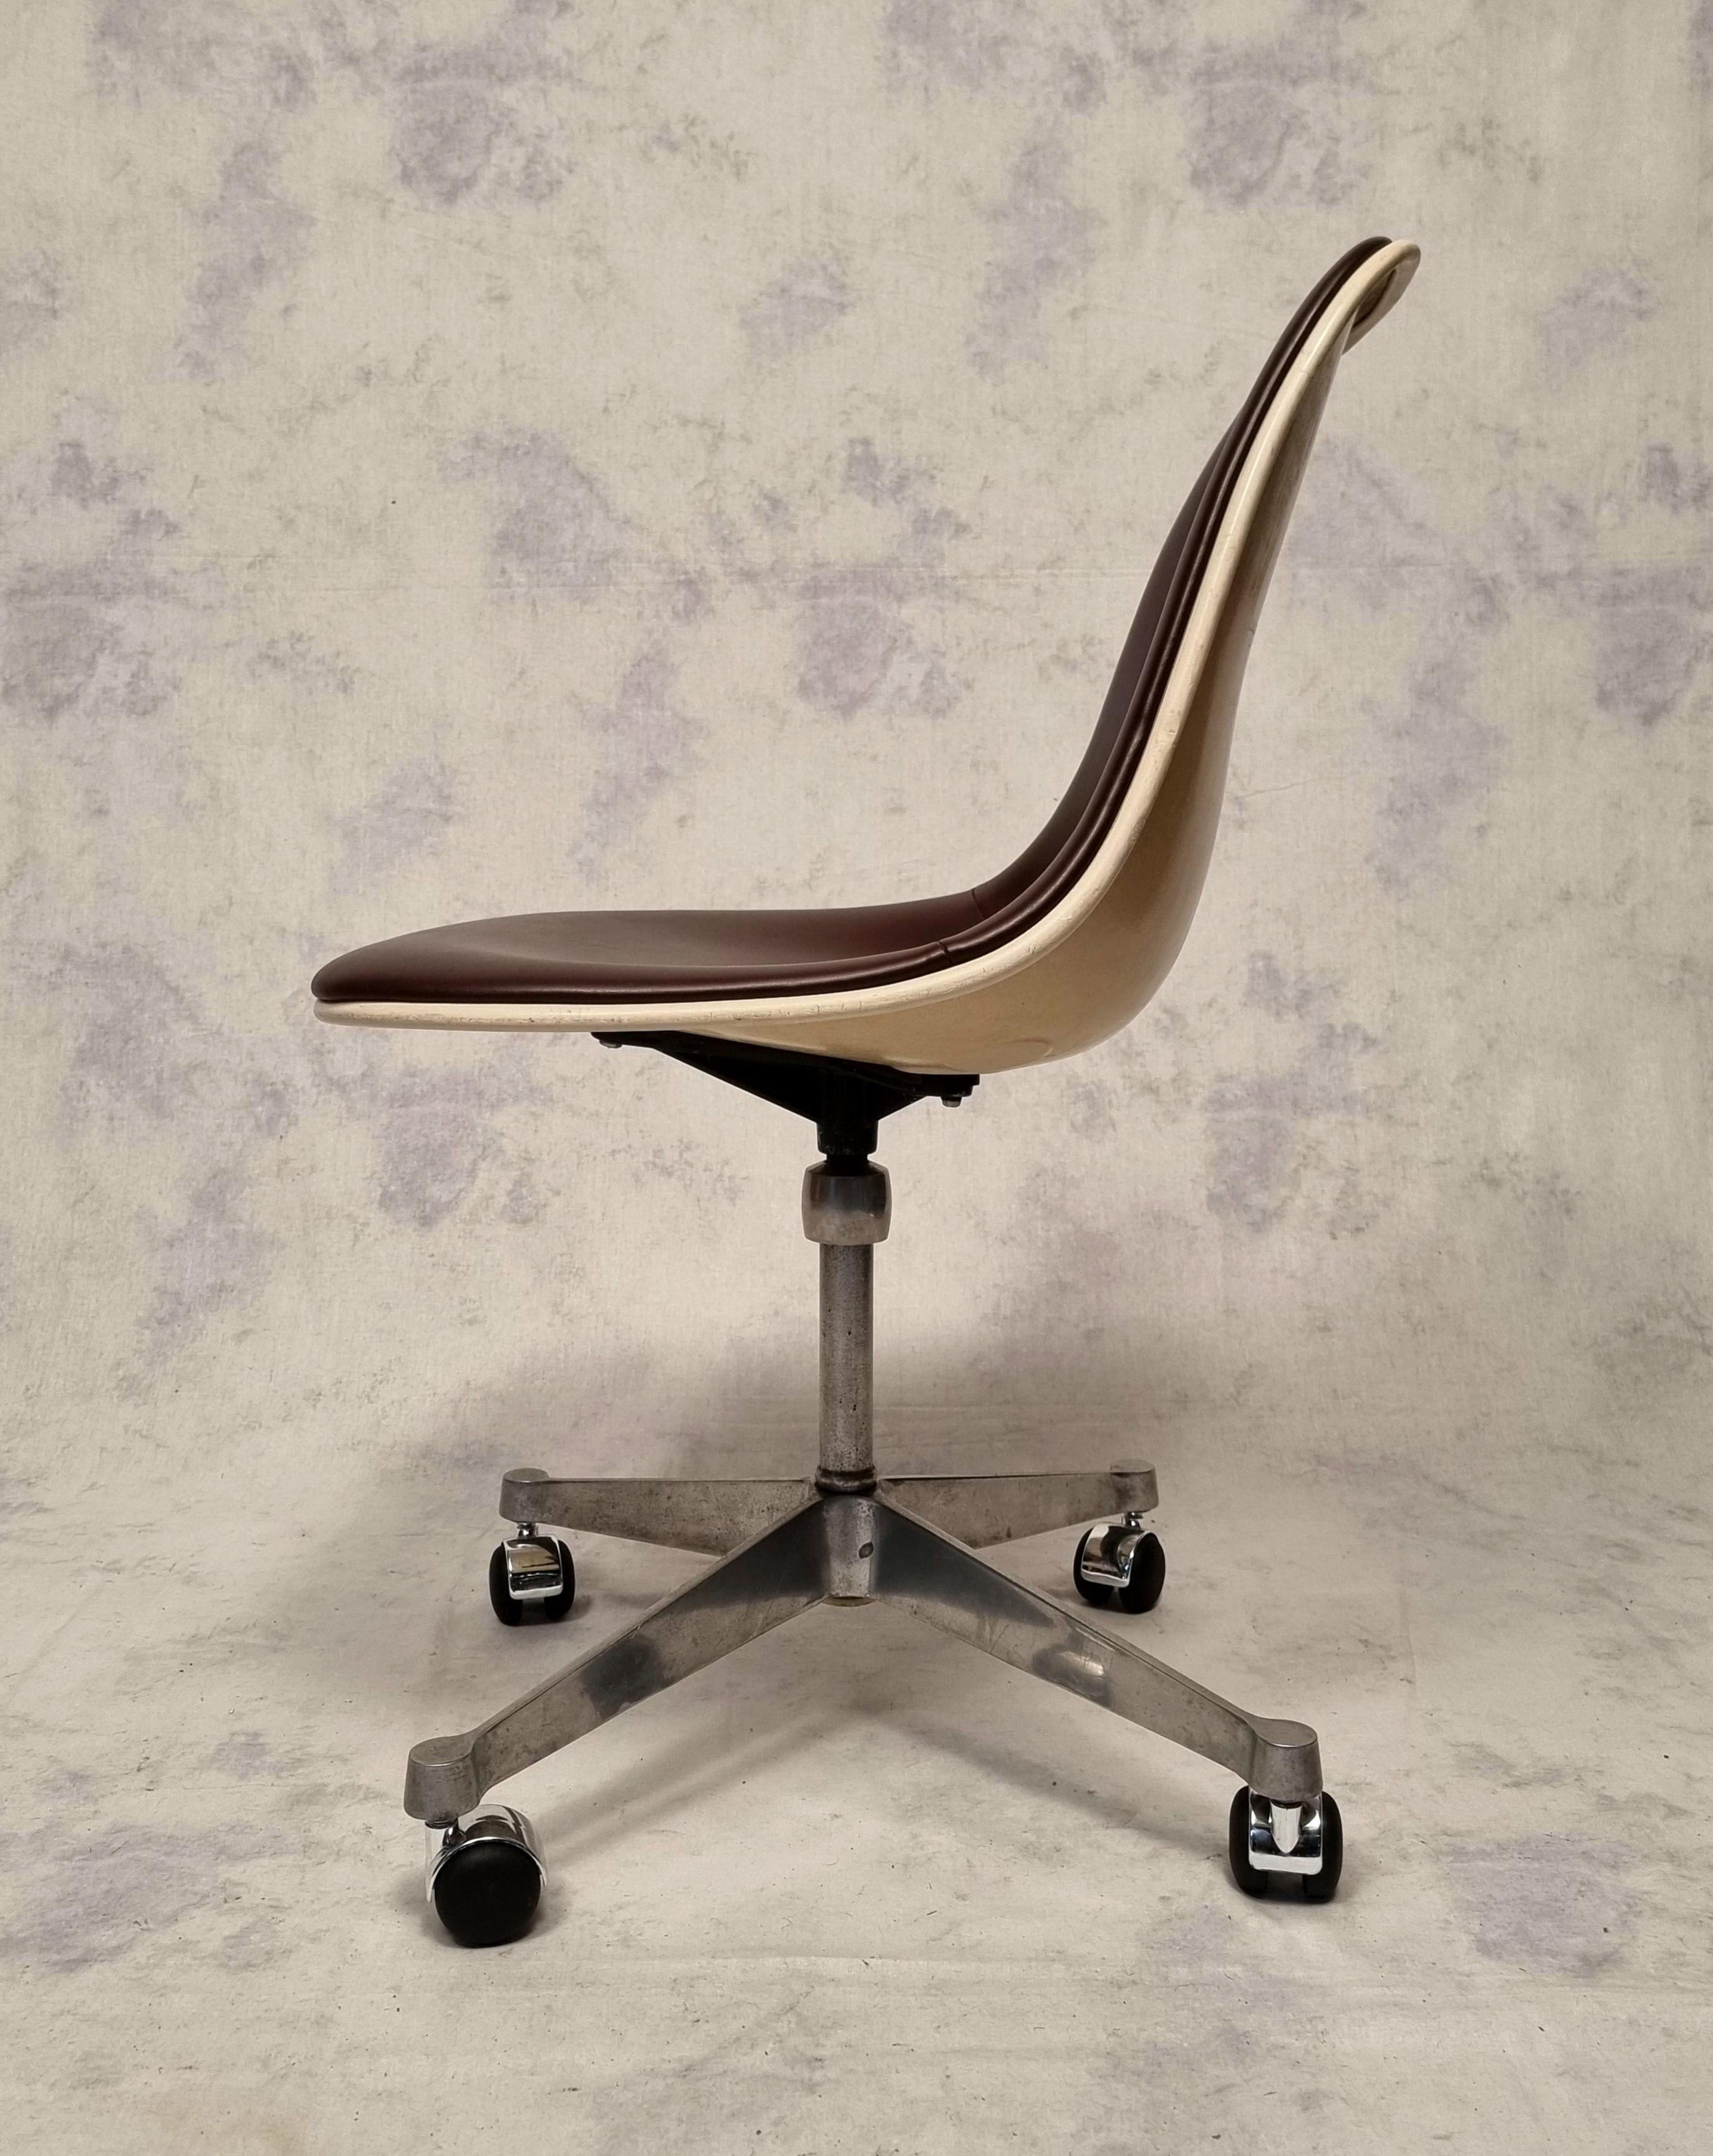 American Office Chair By Charles And Ray Eames For Herman Miller - Fiberglass - Ca 1960 For Sale